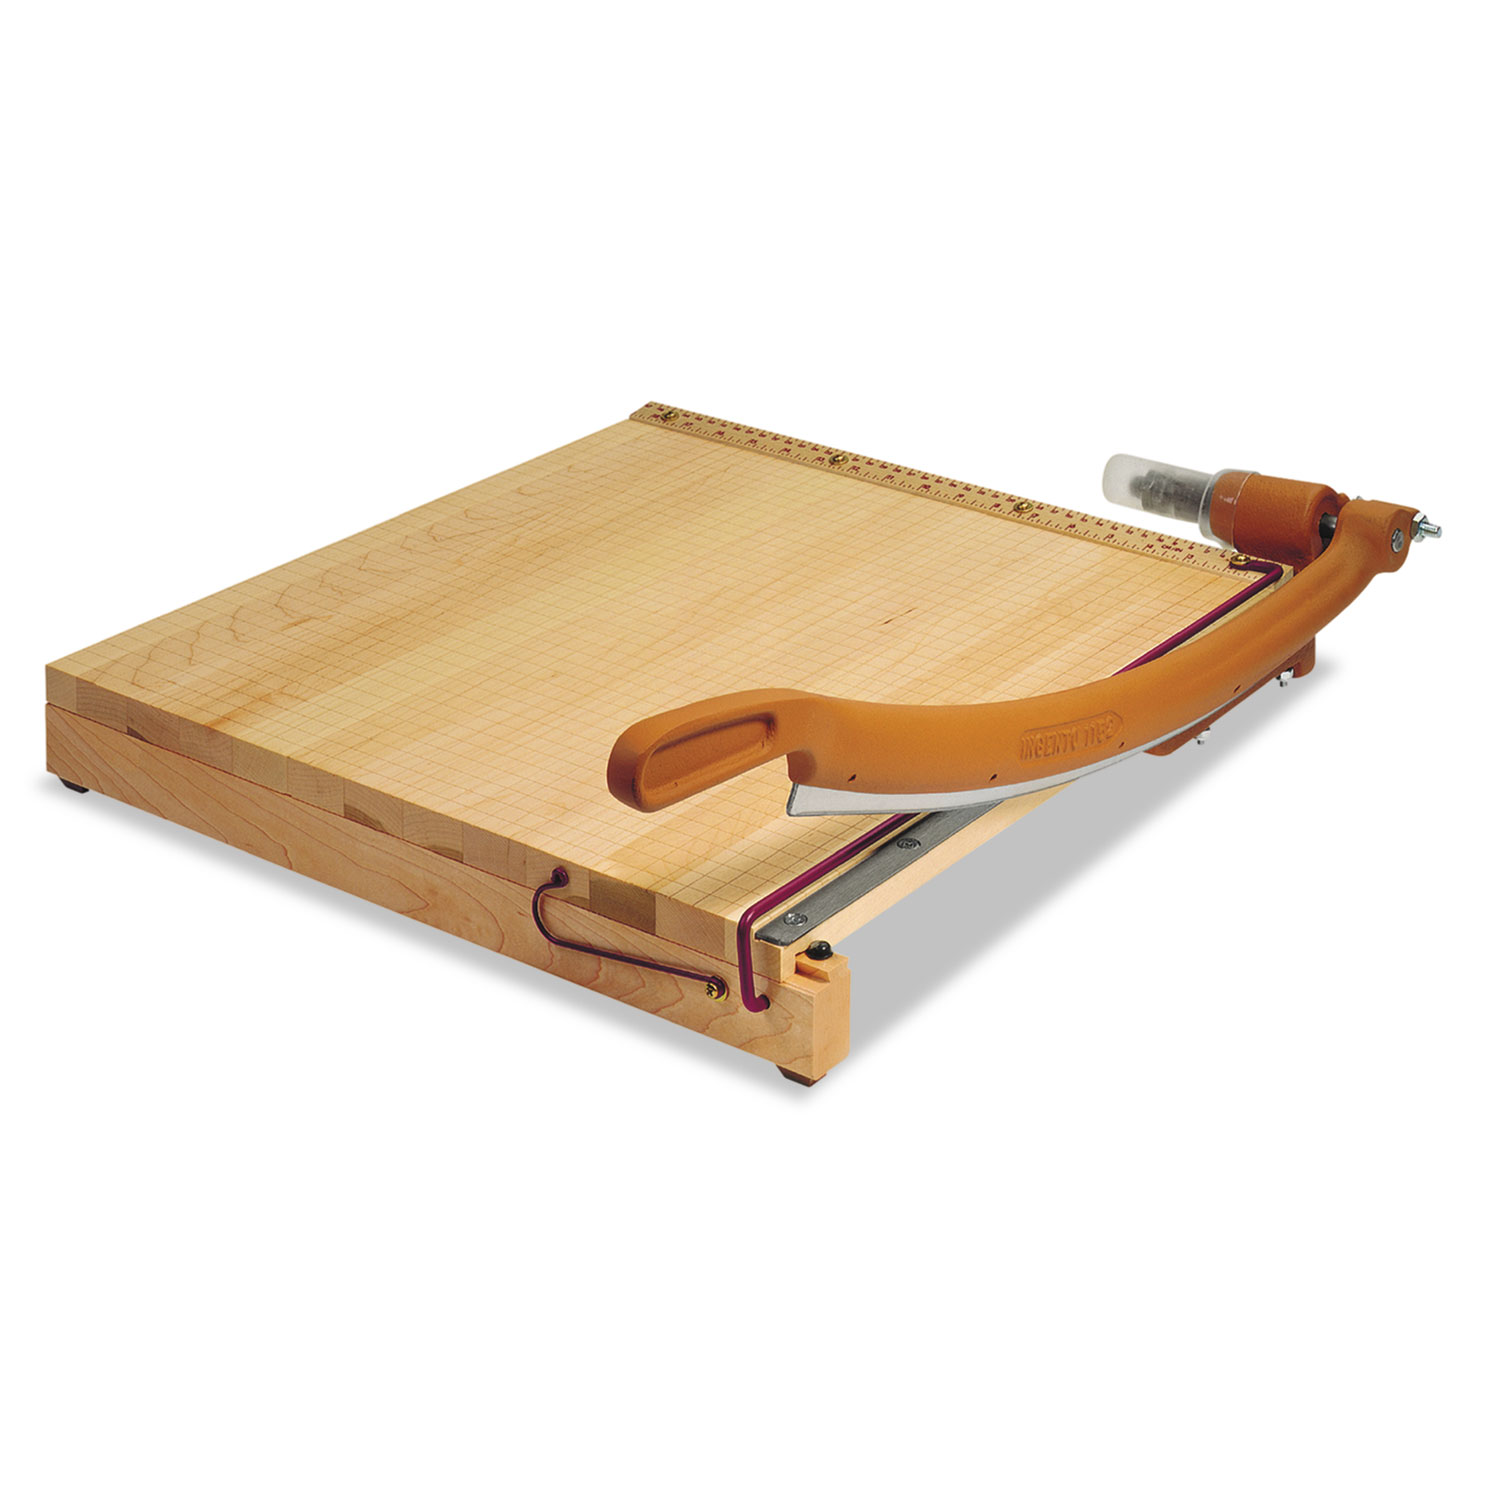  Swingline 1152A ClassicCut Ingento Solid Maple Paper Trimmer, 15 Sheets, Maple Base, 18 x 18 (SWI1152) 